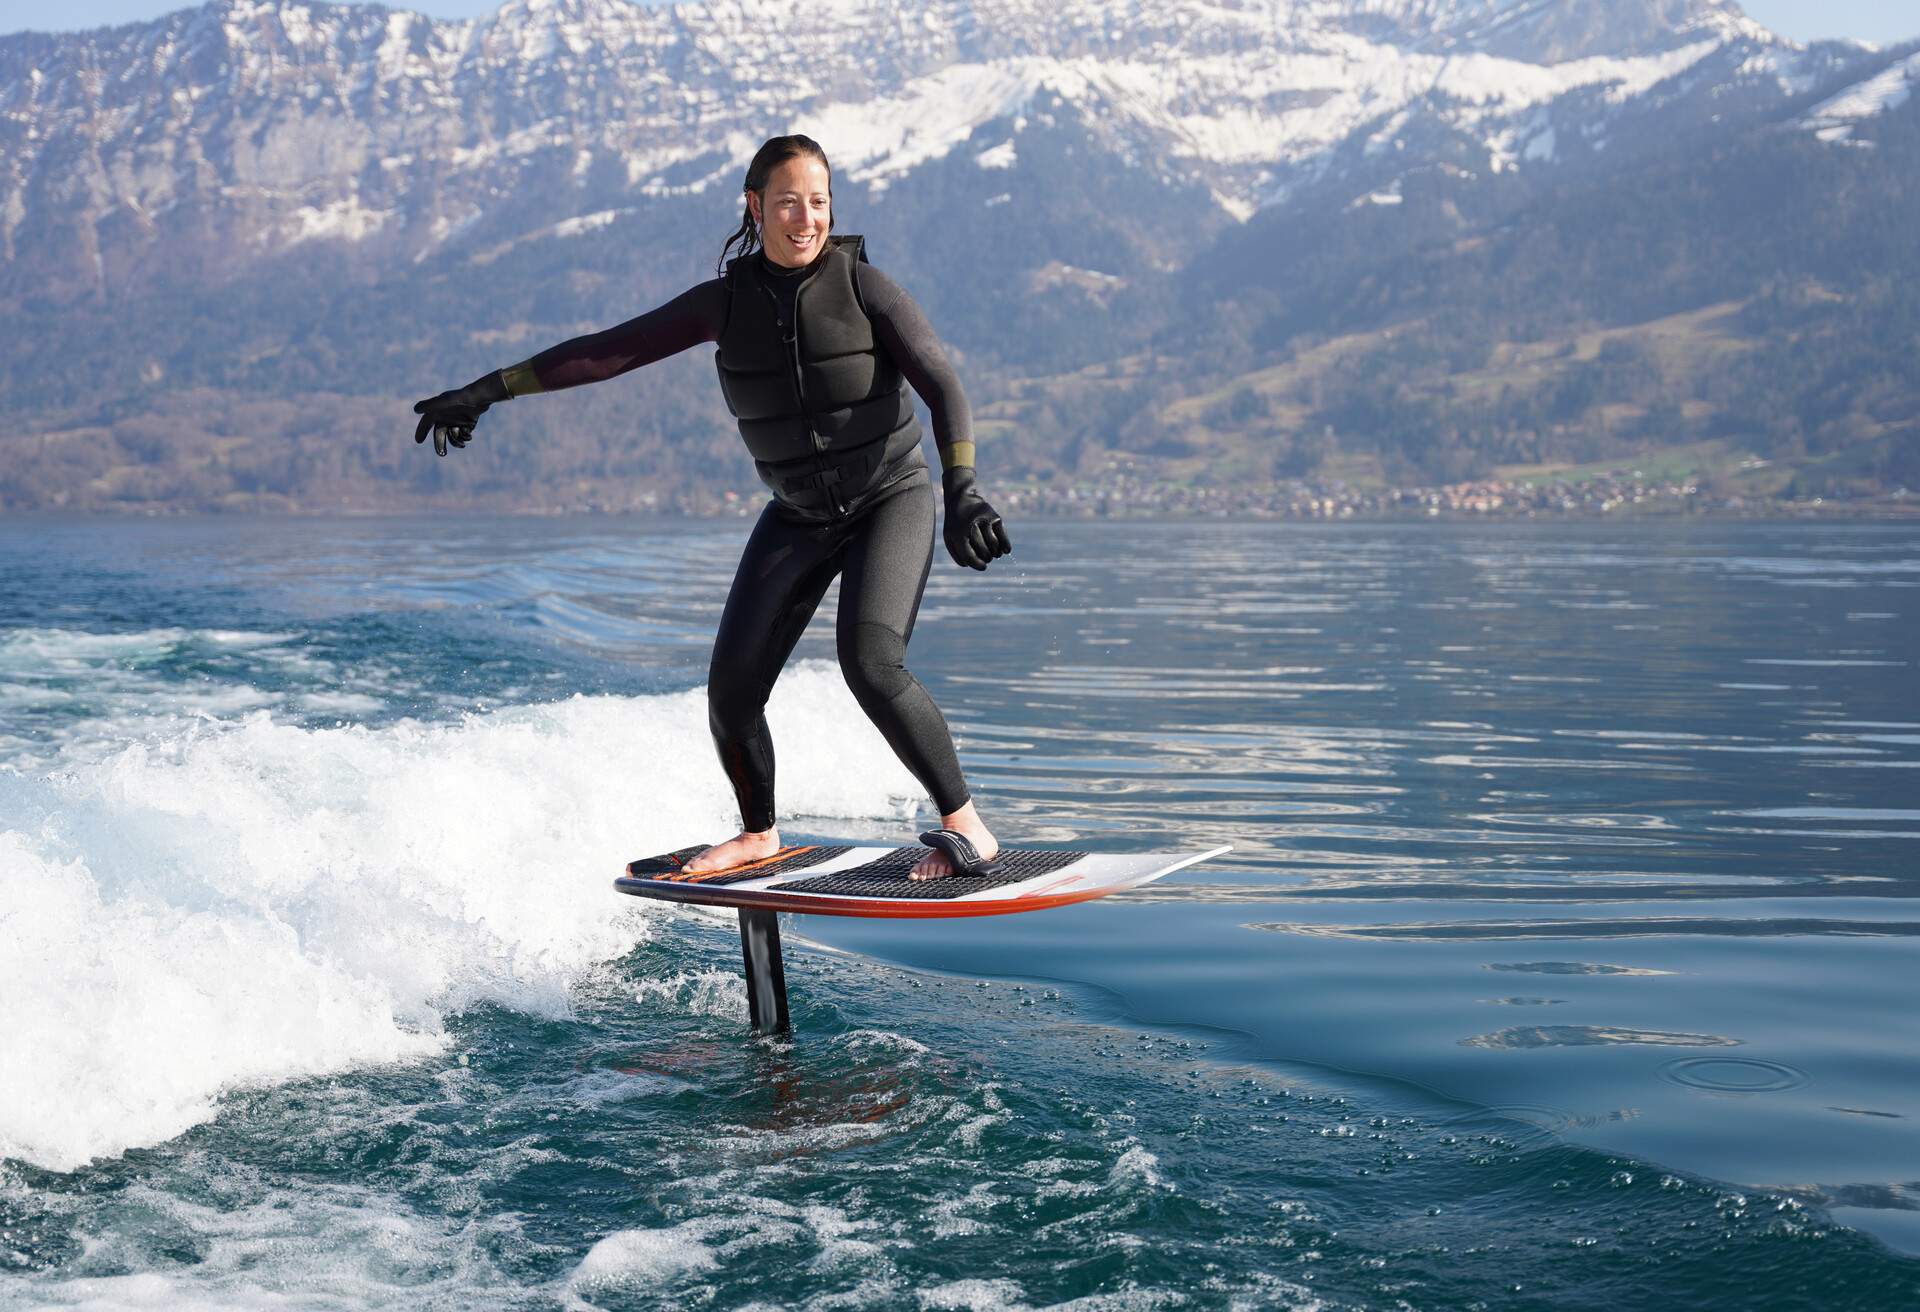 She surfs the wake behind boat in Lake Thun, Swiss Alps behind